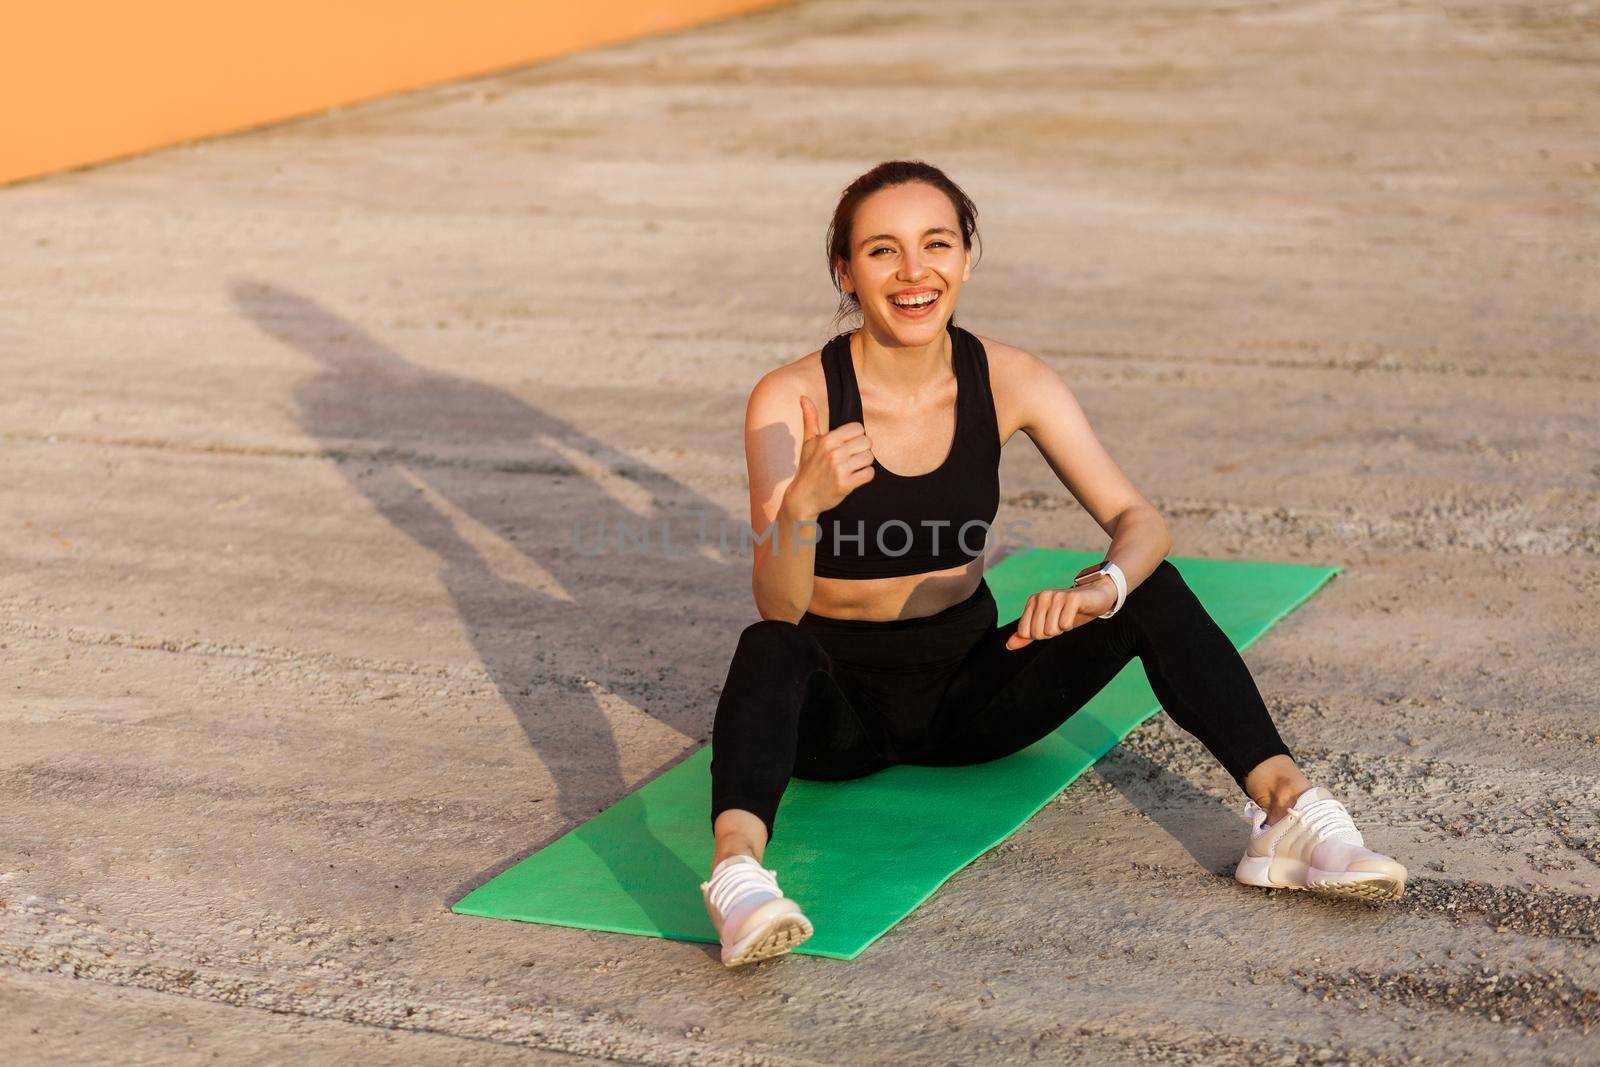 Young brunette woman and sport workout outdoor. by Khosro1